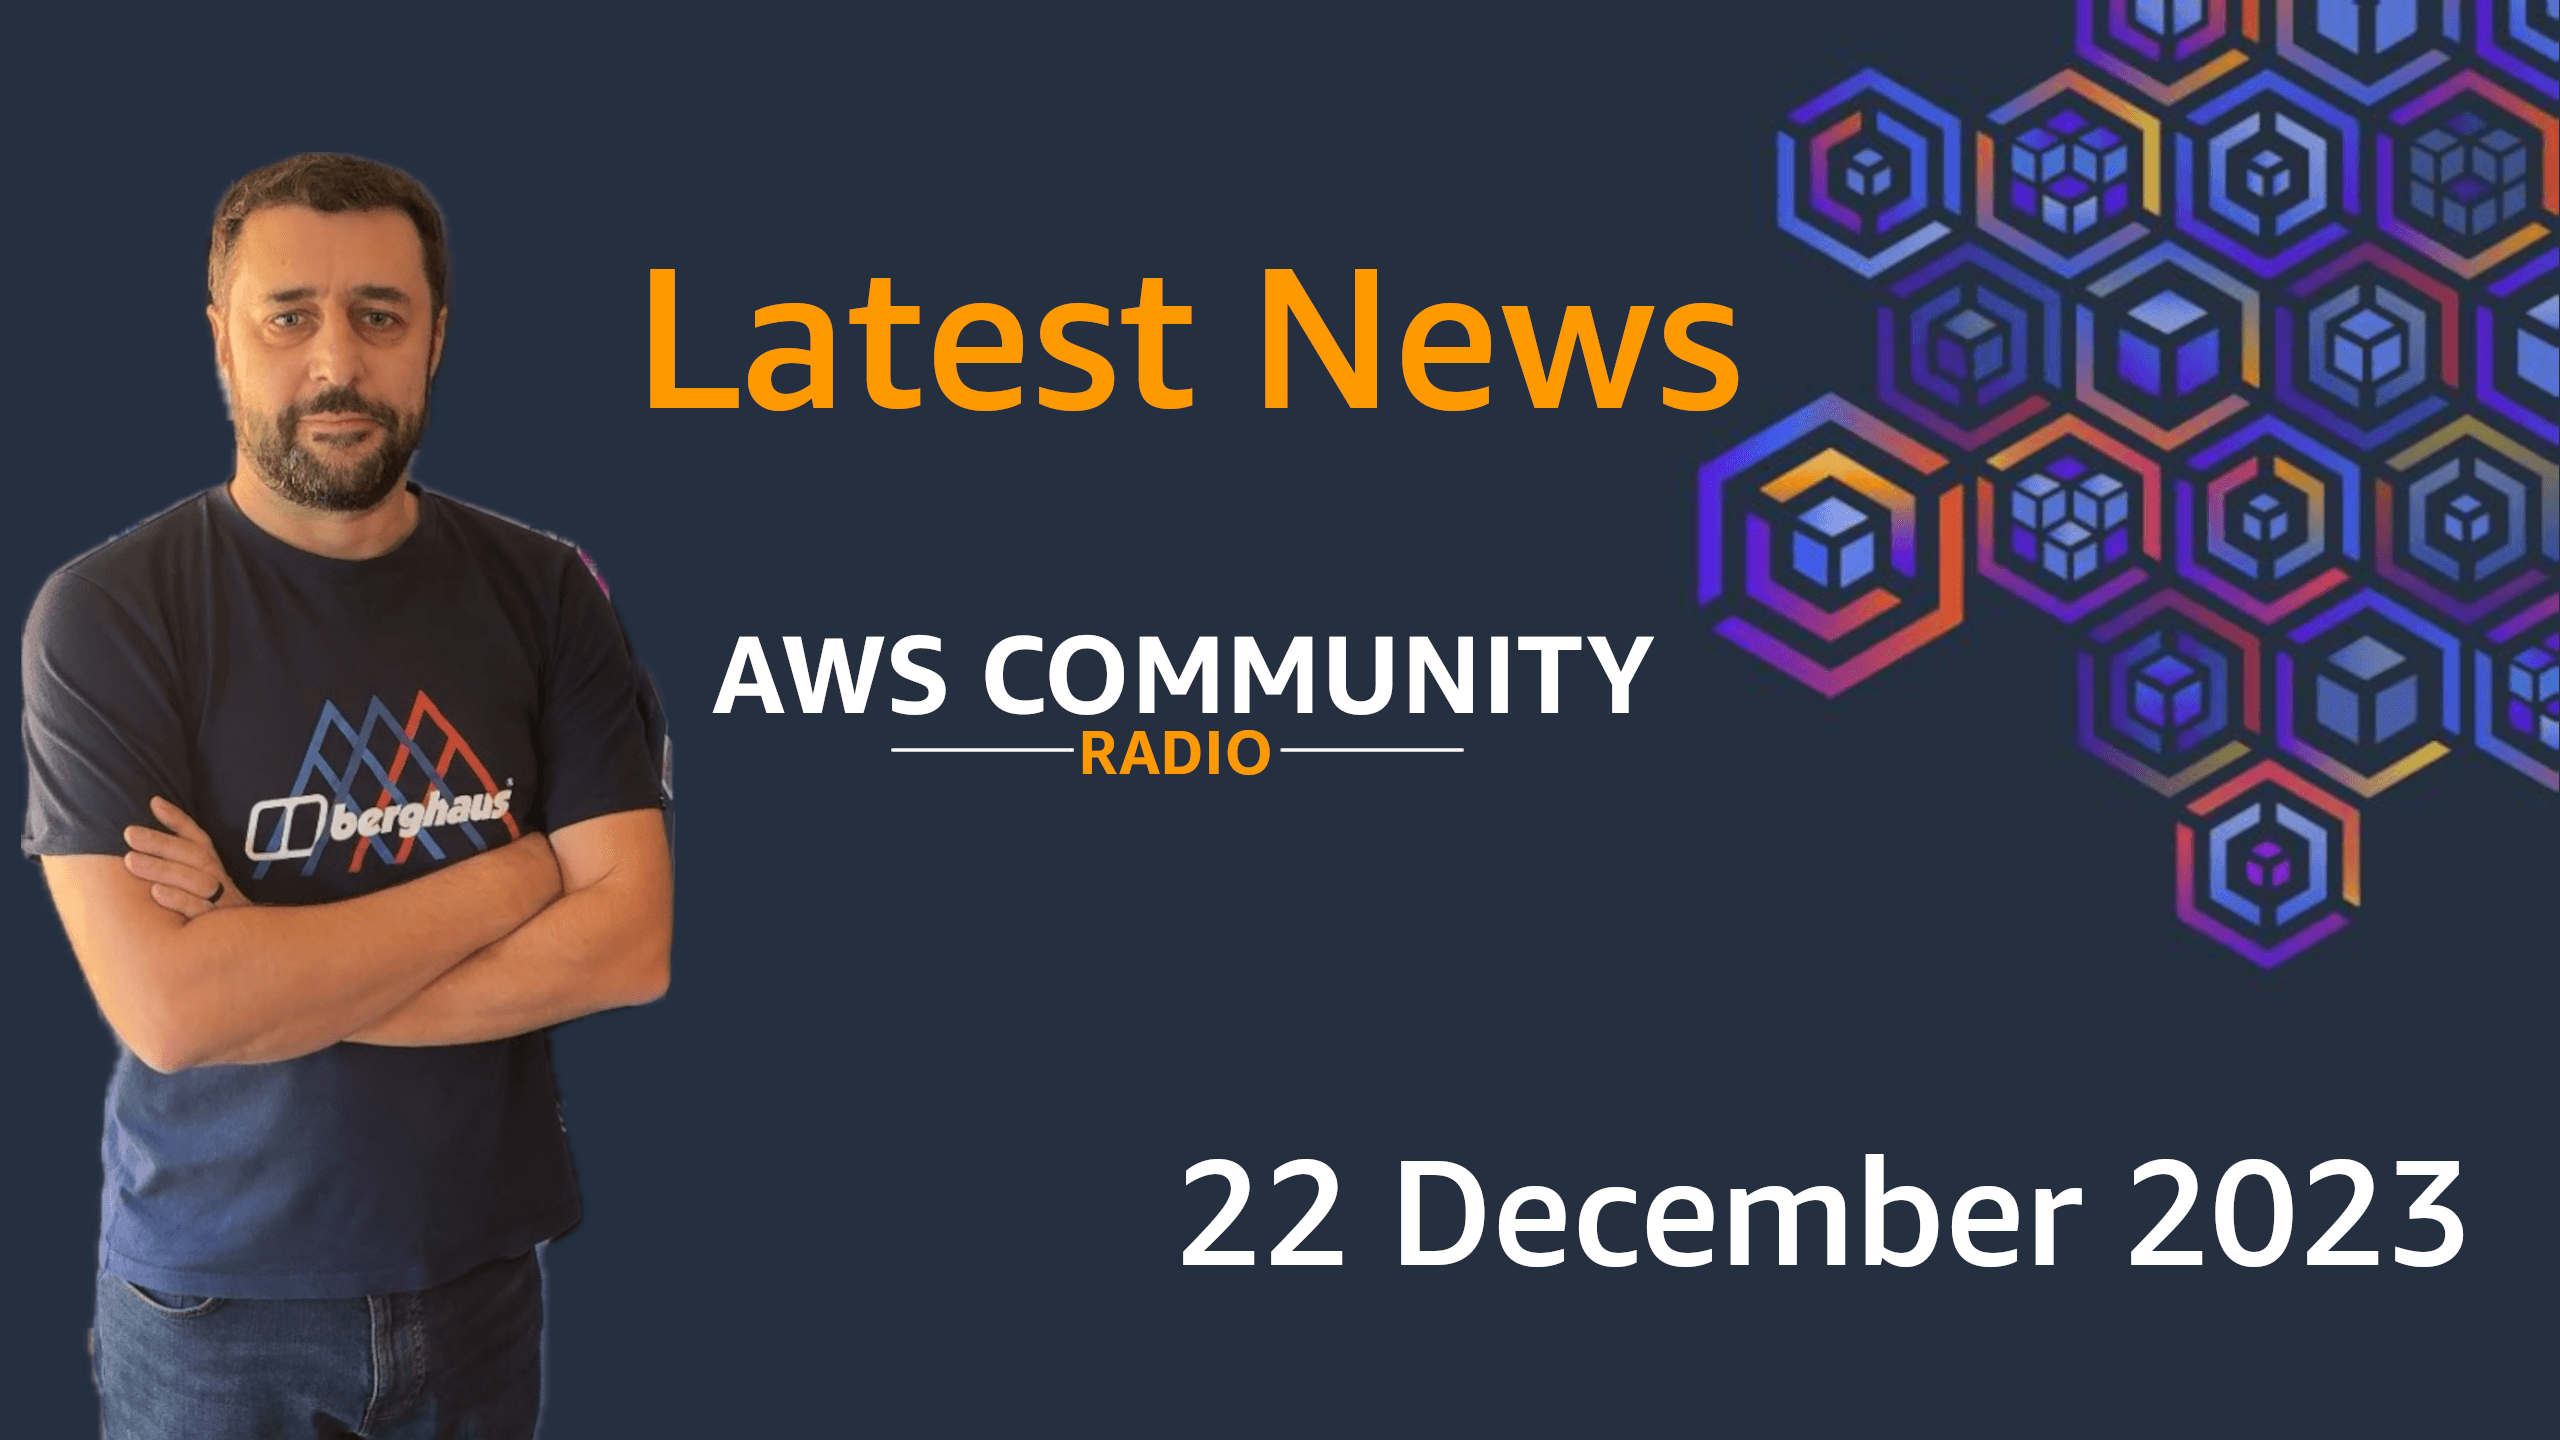 Big updates for AWS including EKS and easier upgrades, RDS and developer tooling to save you money!